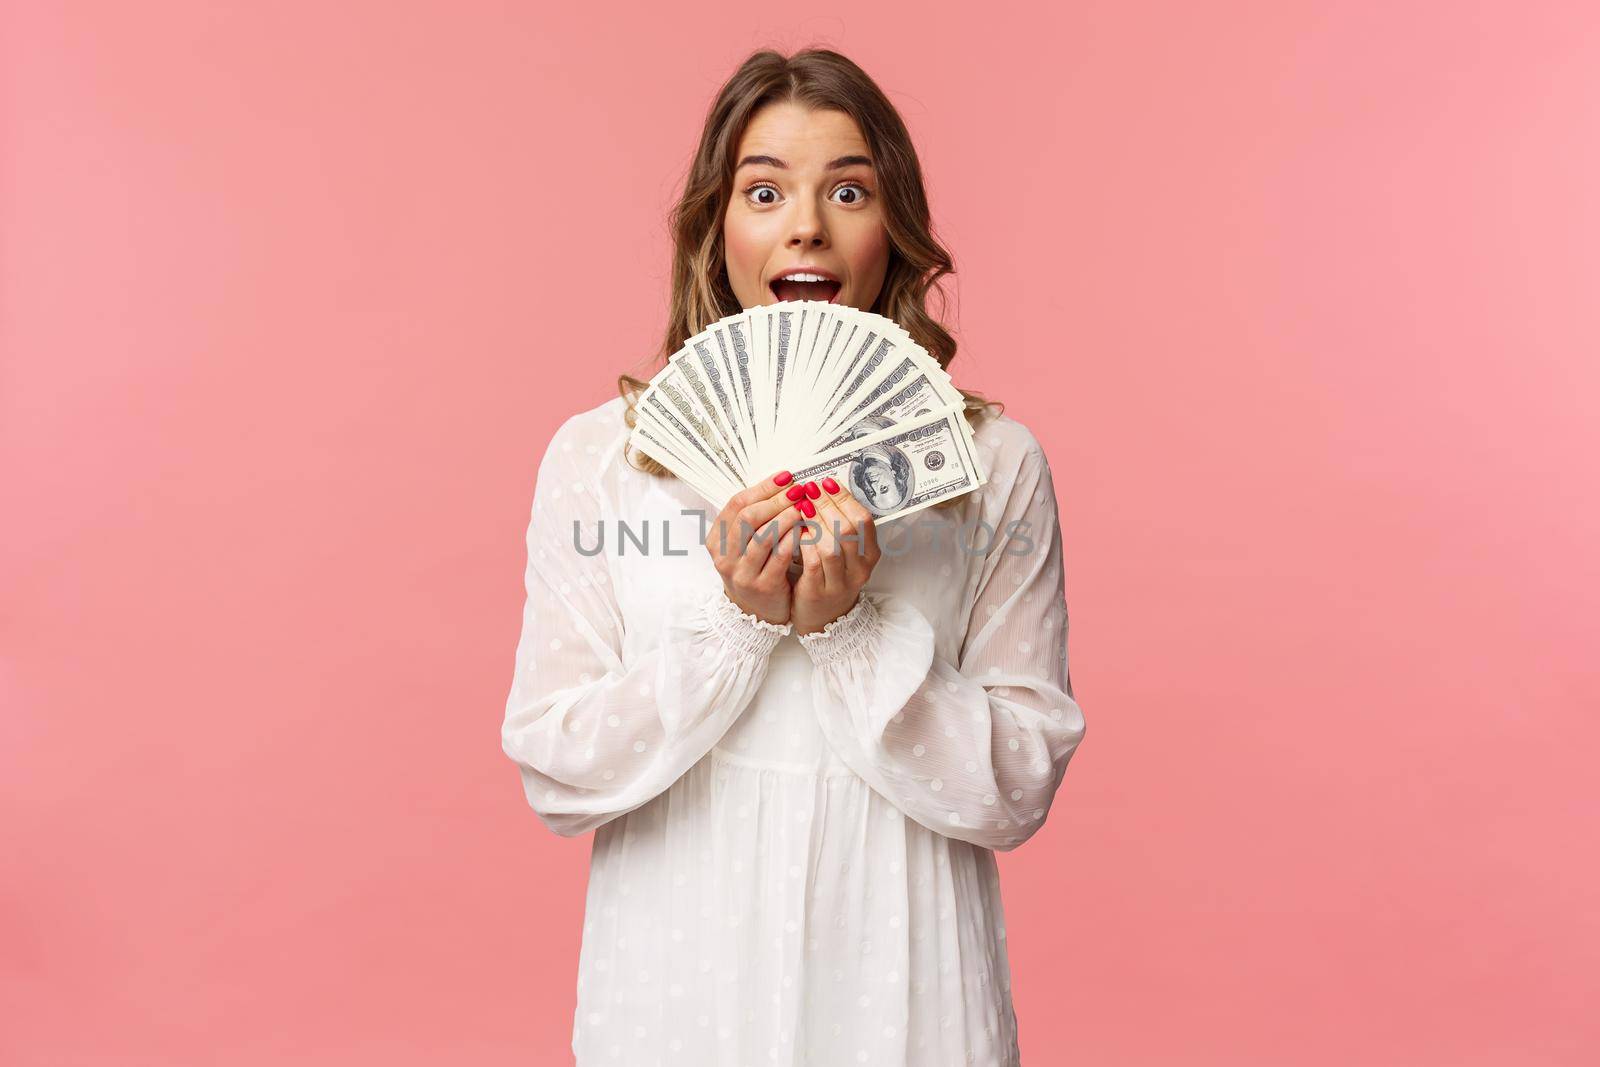 Portrait of excited lucky girl with blond hair, white dress, winning money, receive cash award, big lottery prize, holding dollars near face, smiling and looking amazed, standing pink background.